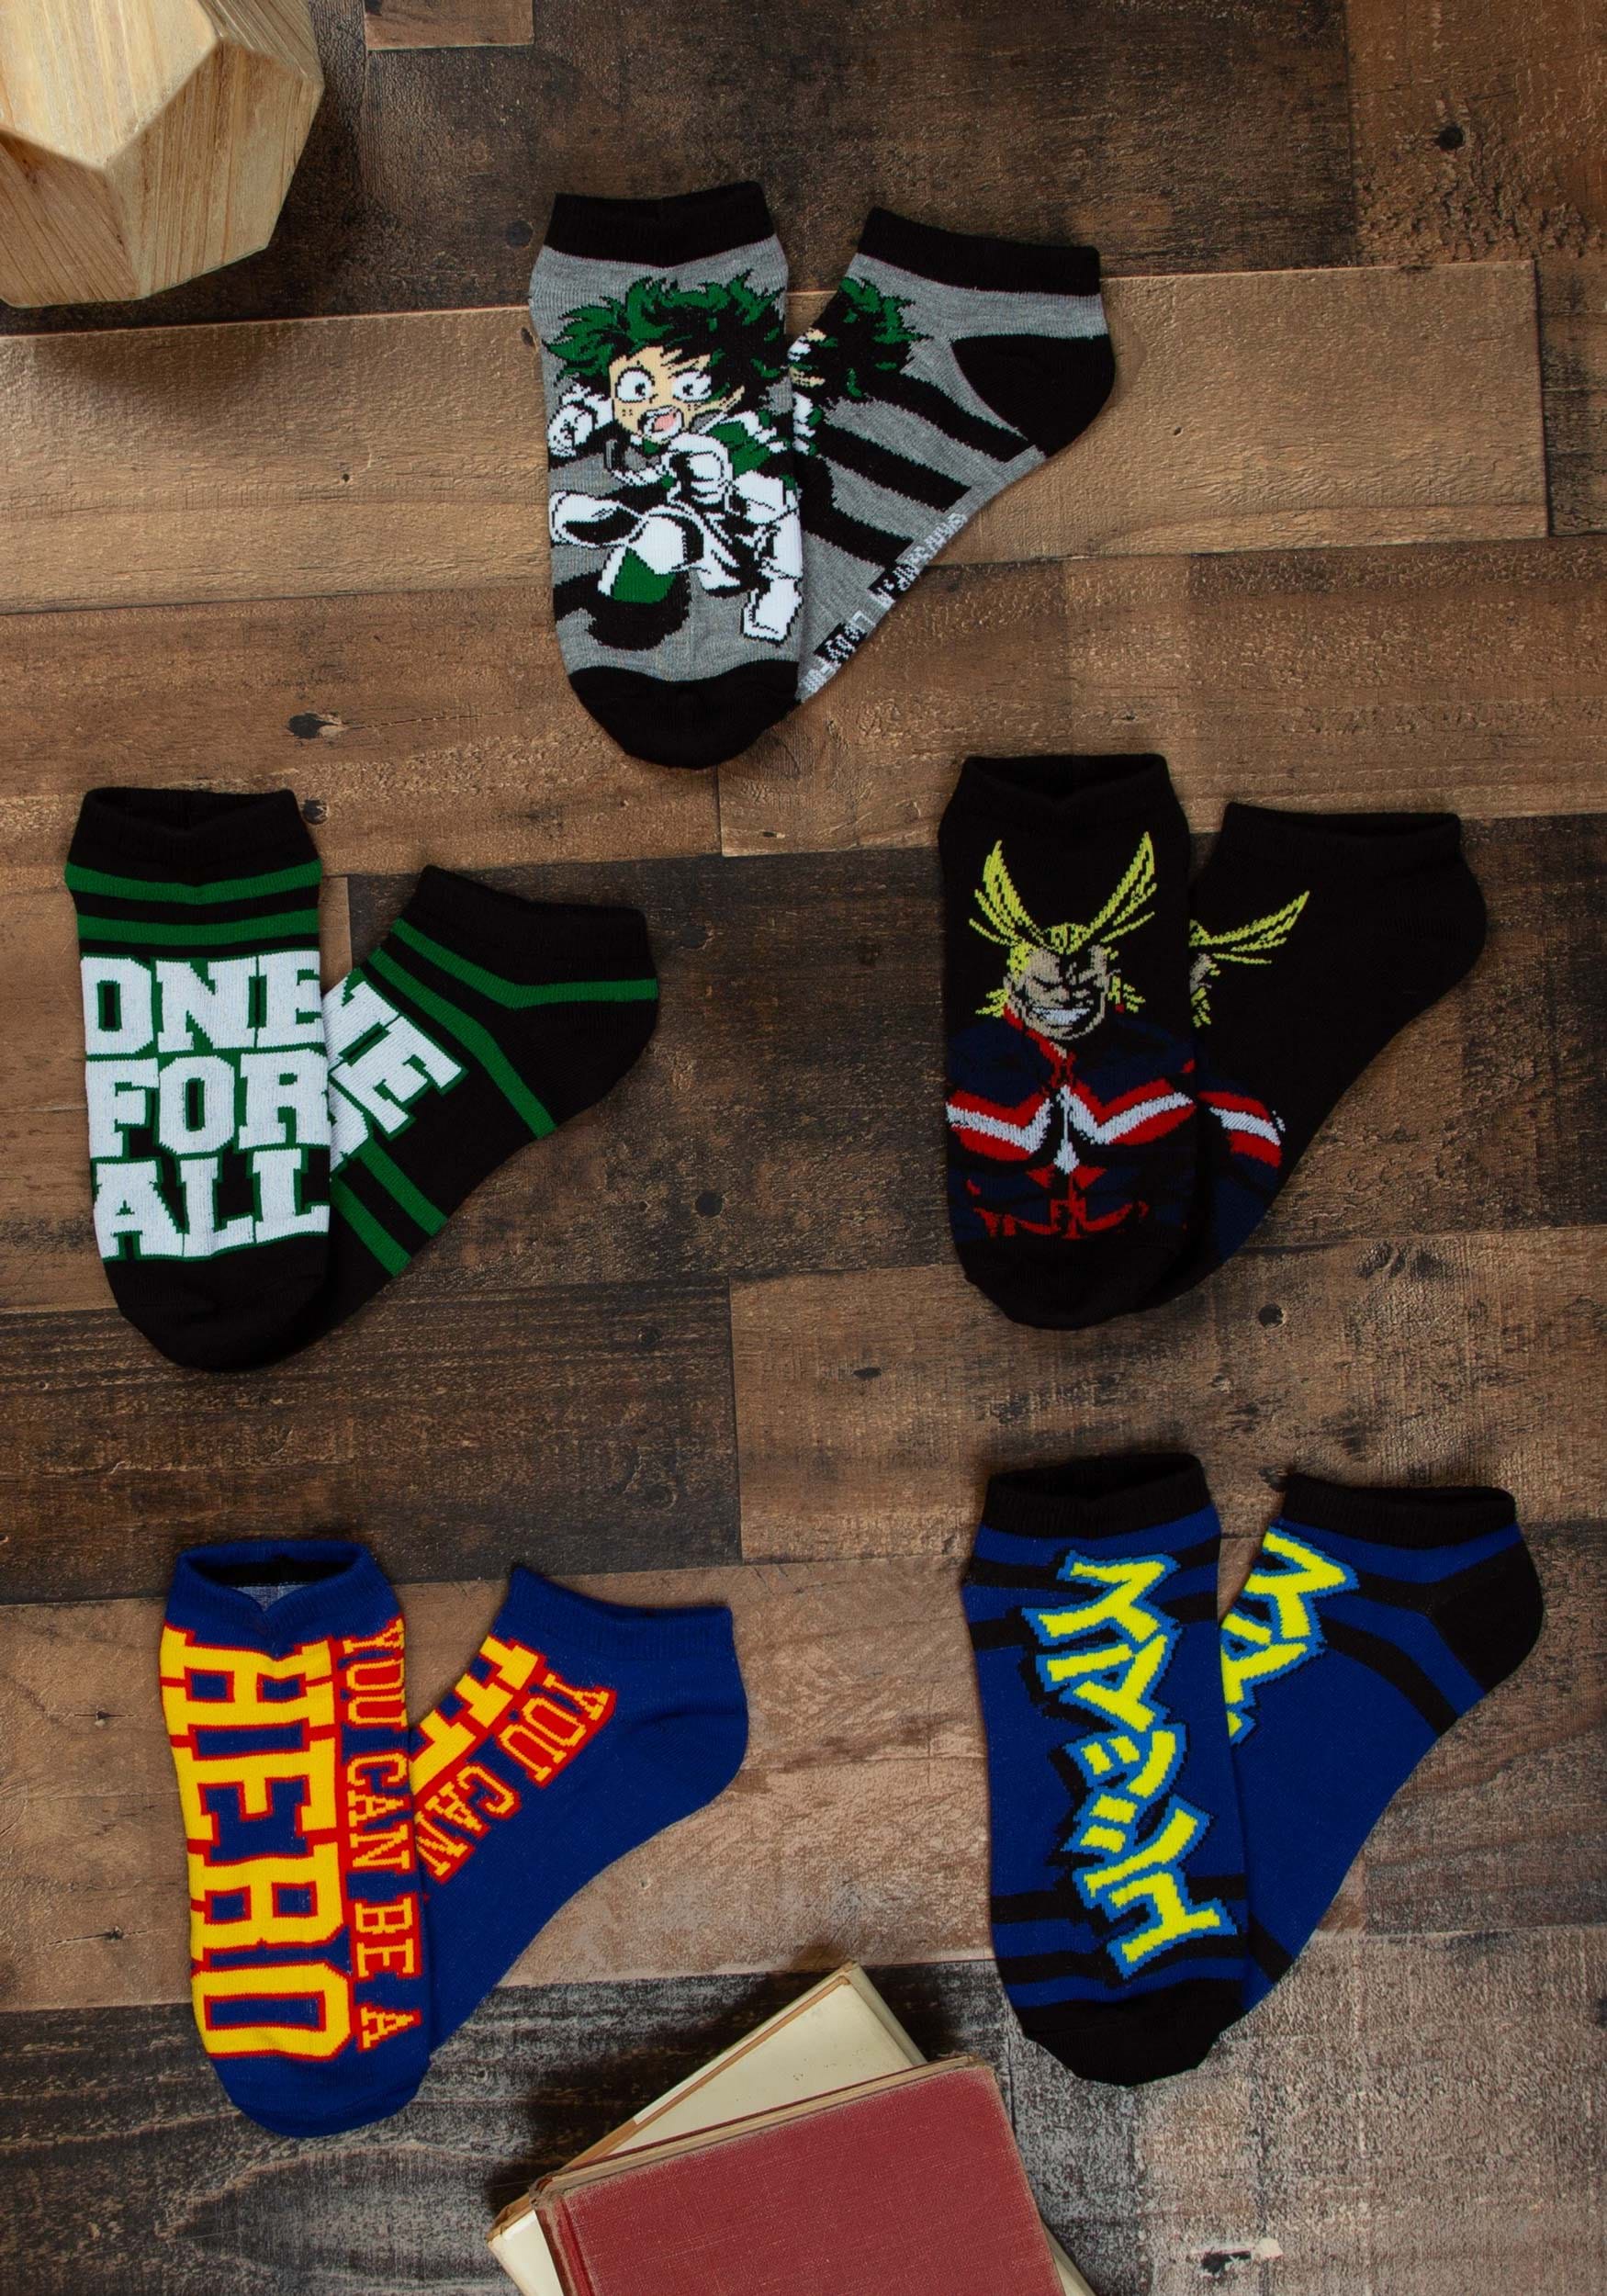 https://images.fun.com/products/56498/1-1/my-hero-academia-5-pack-ankle-socks-0.jpg